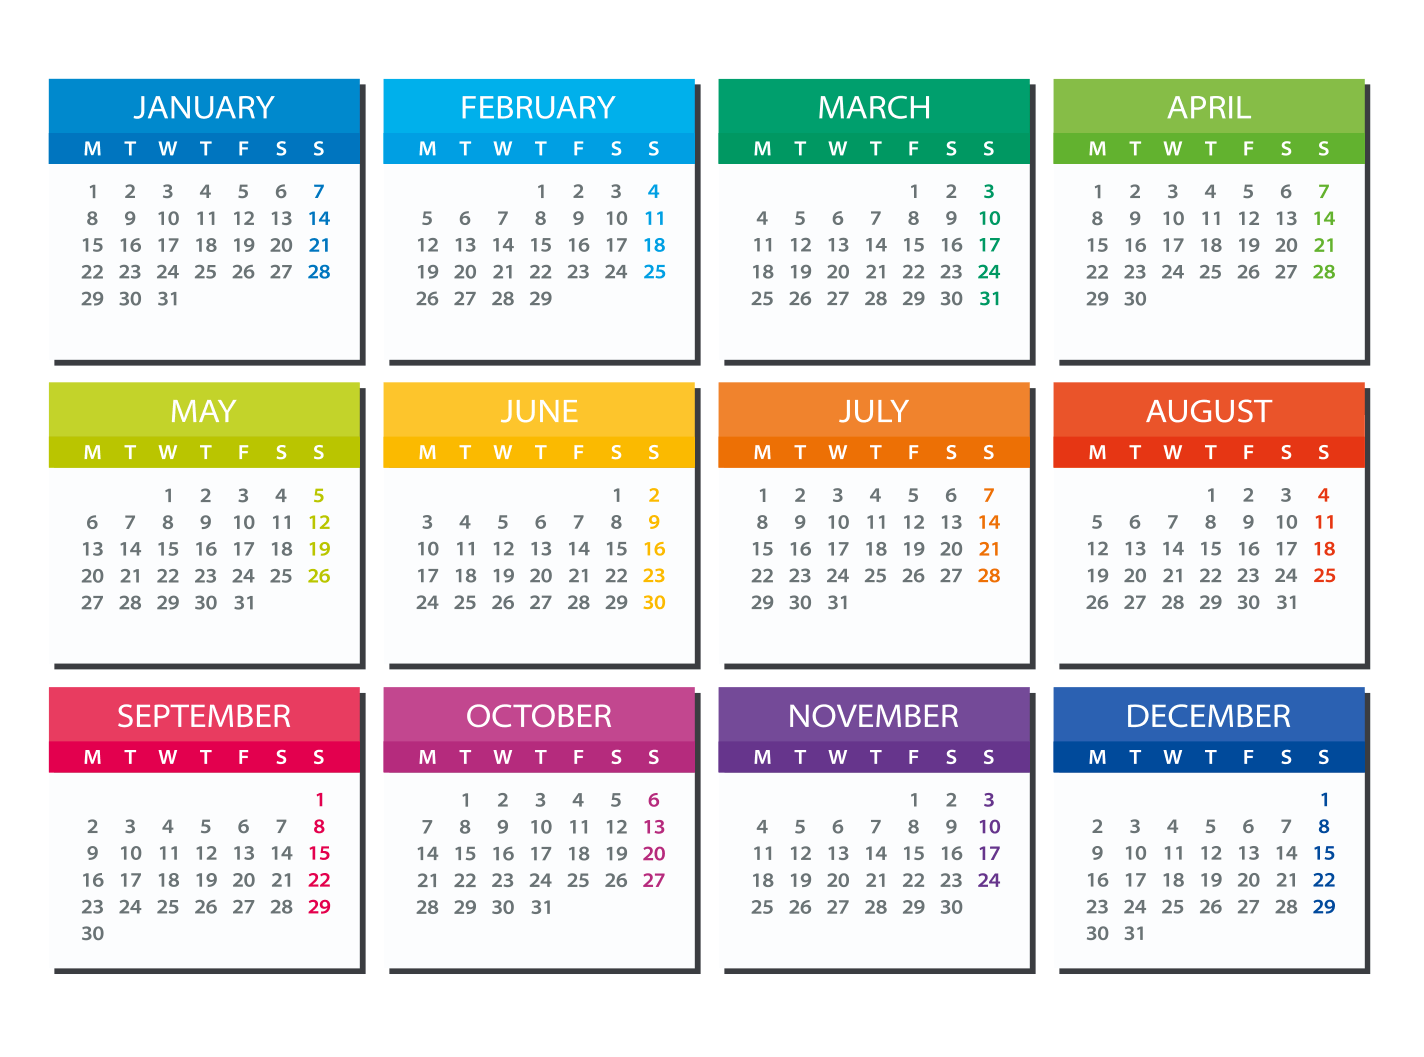 Months in French